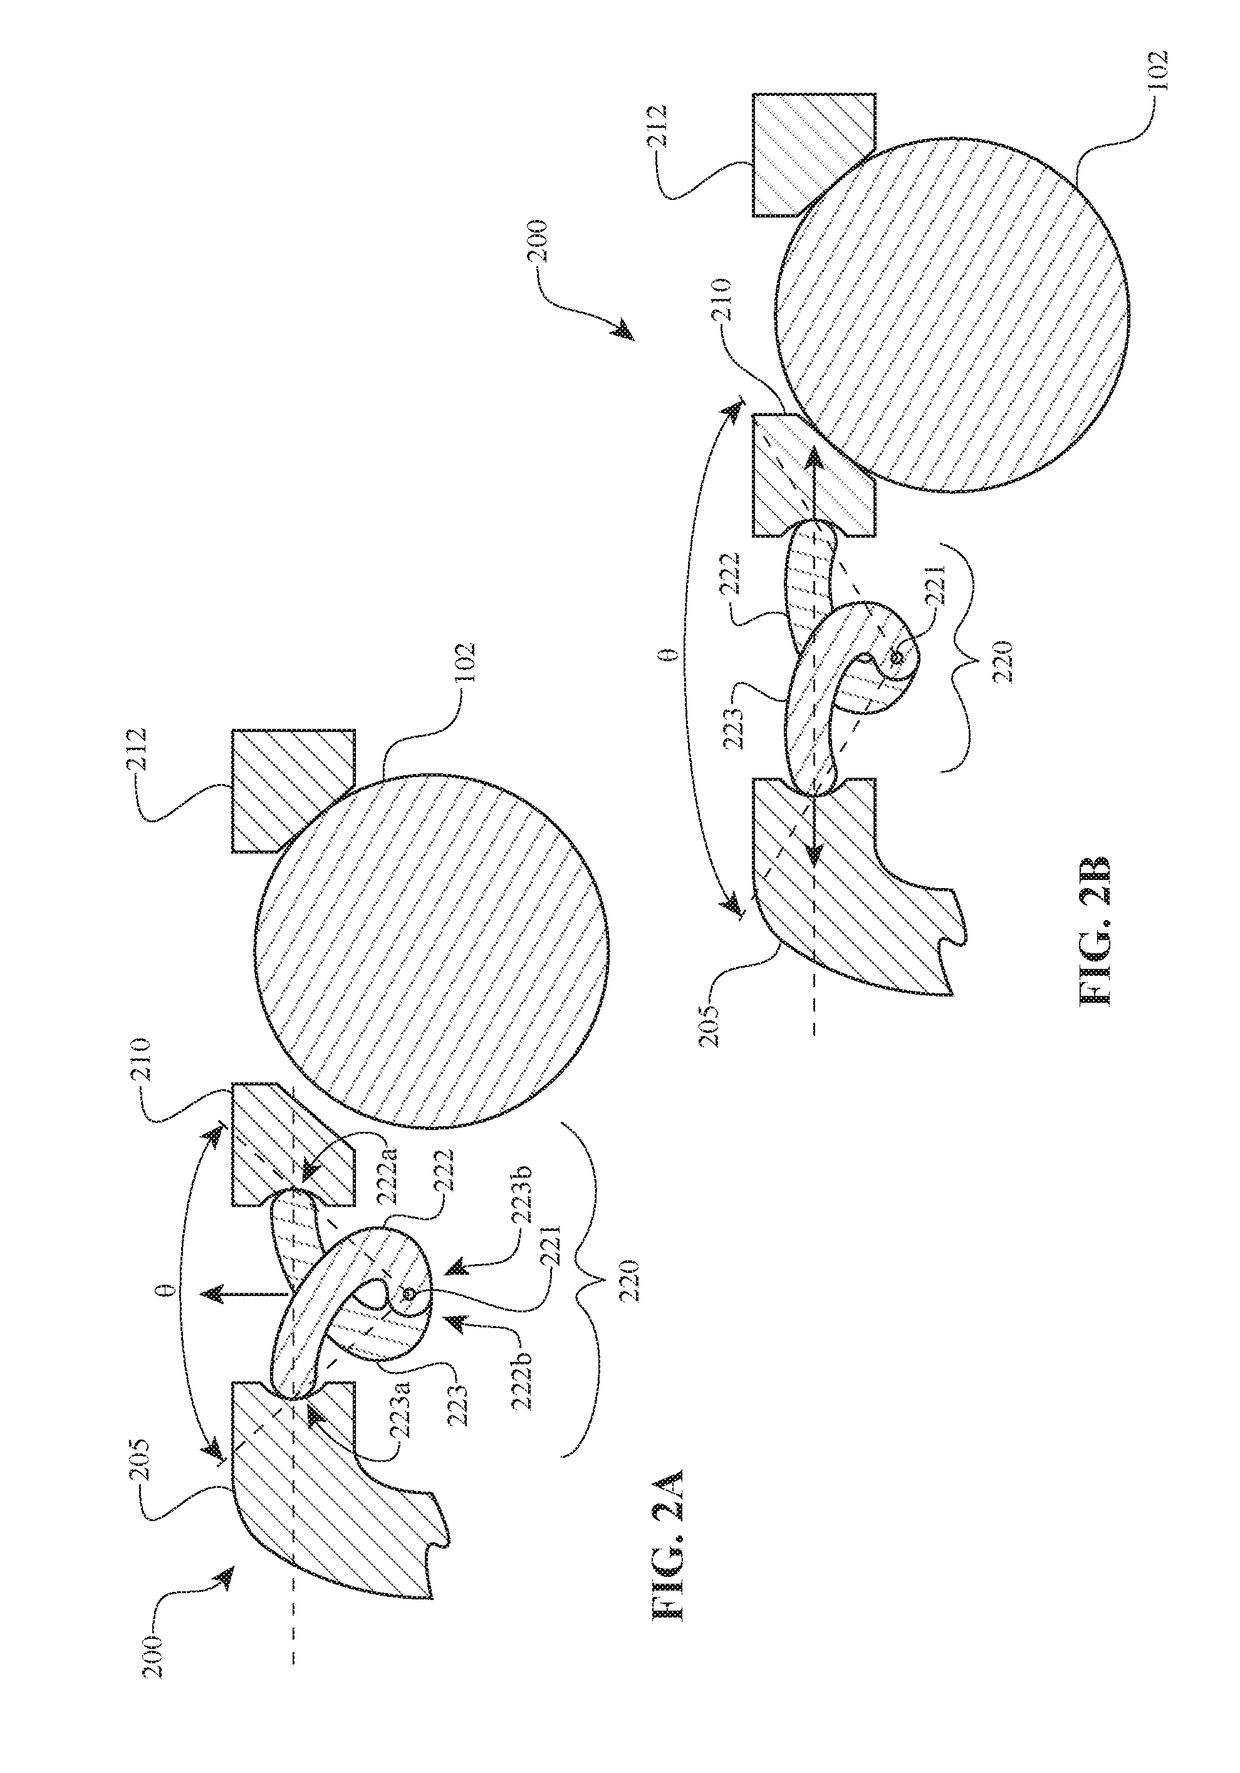 Systems and methods for axial force generation